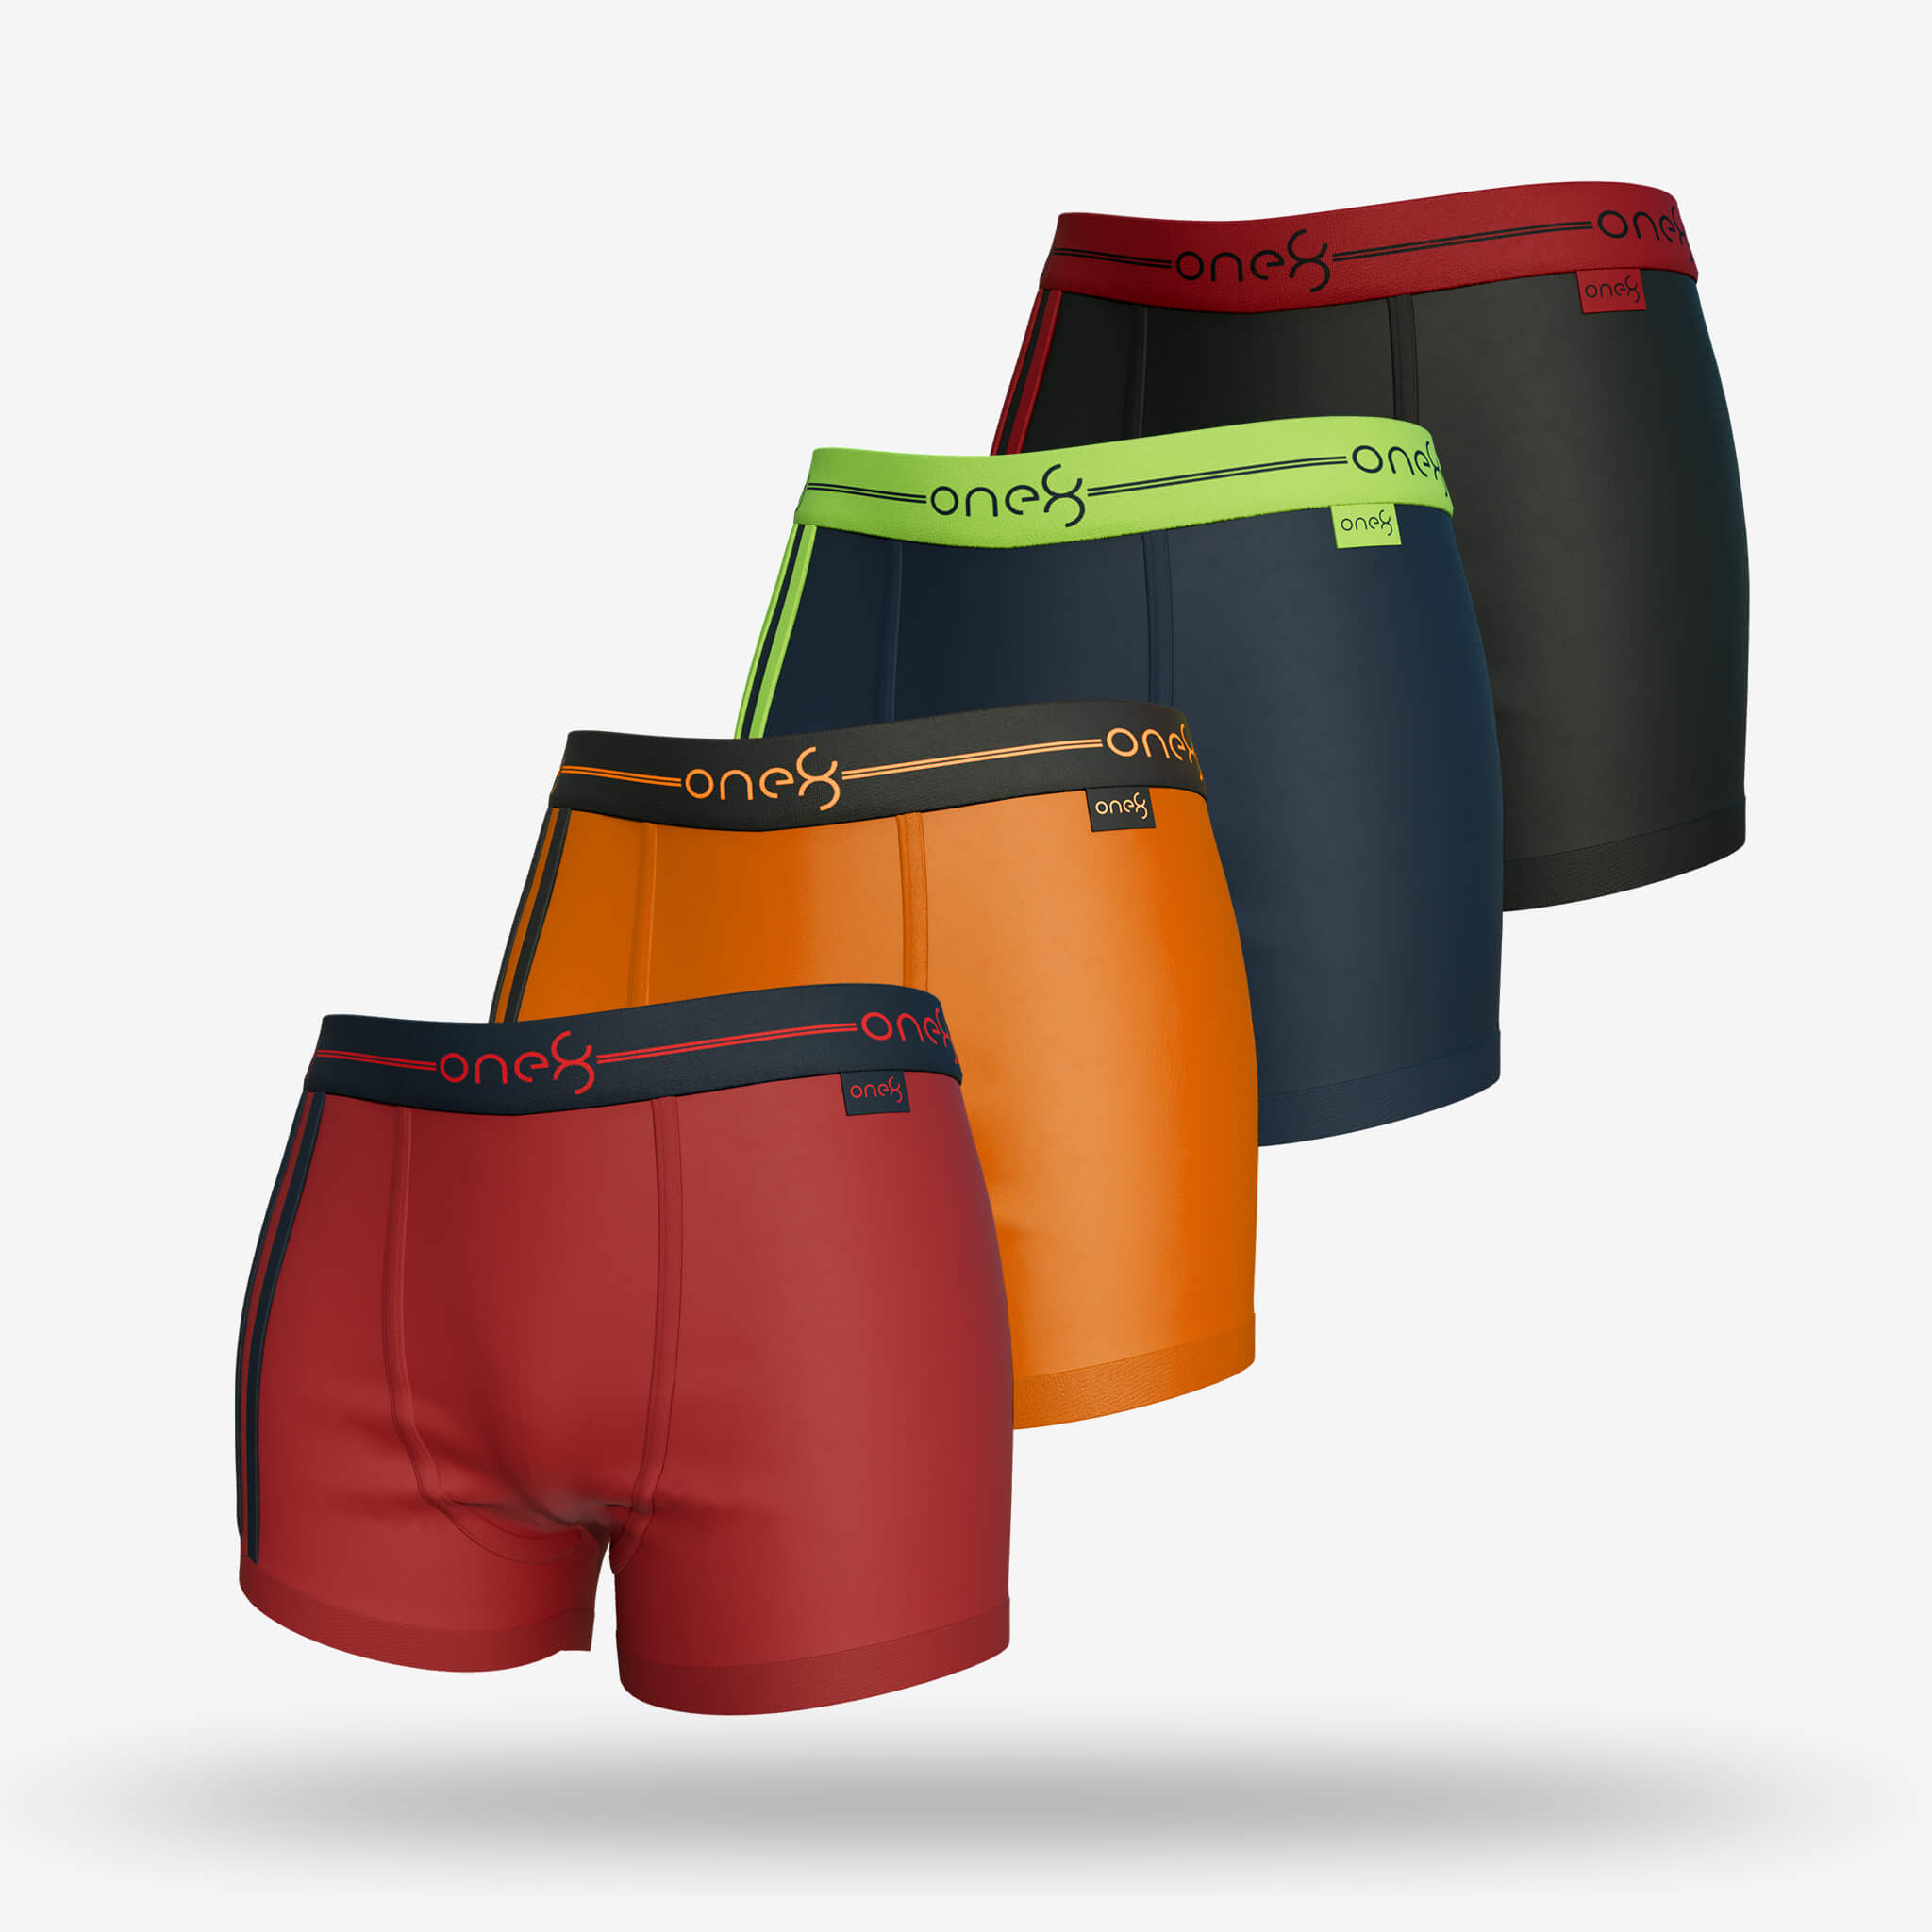 Pouch Boxer – Fashion Trunk (Pack Of 4) – Black, Brick Red, Navy Blue, Orange